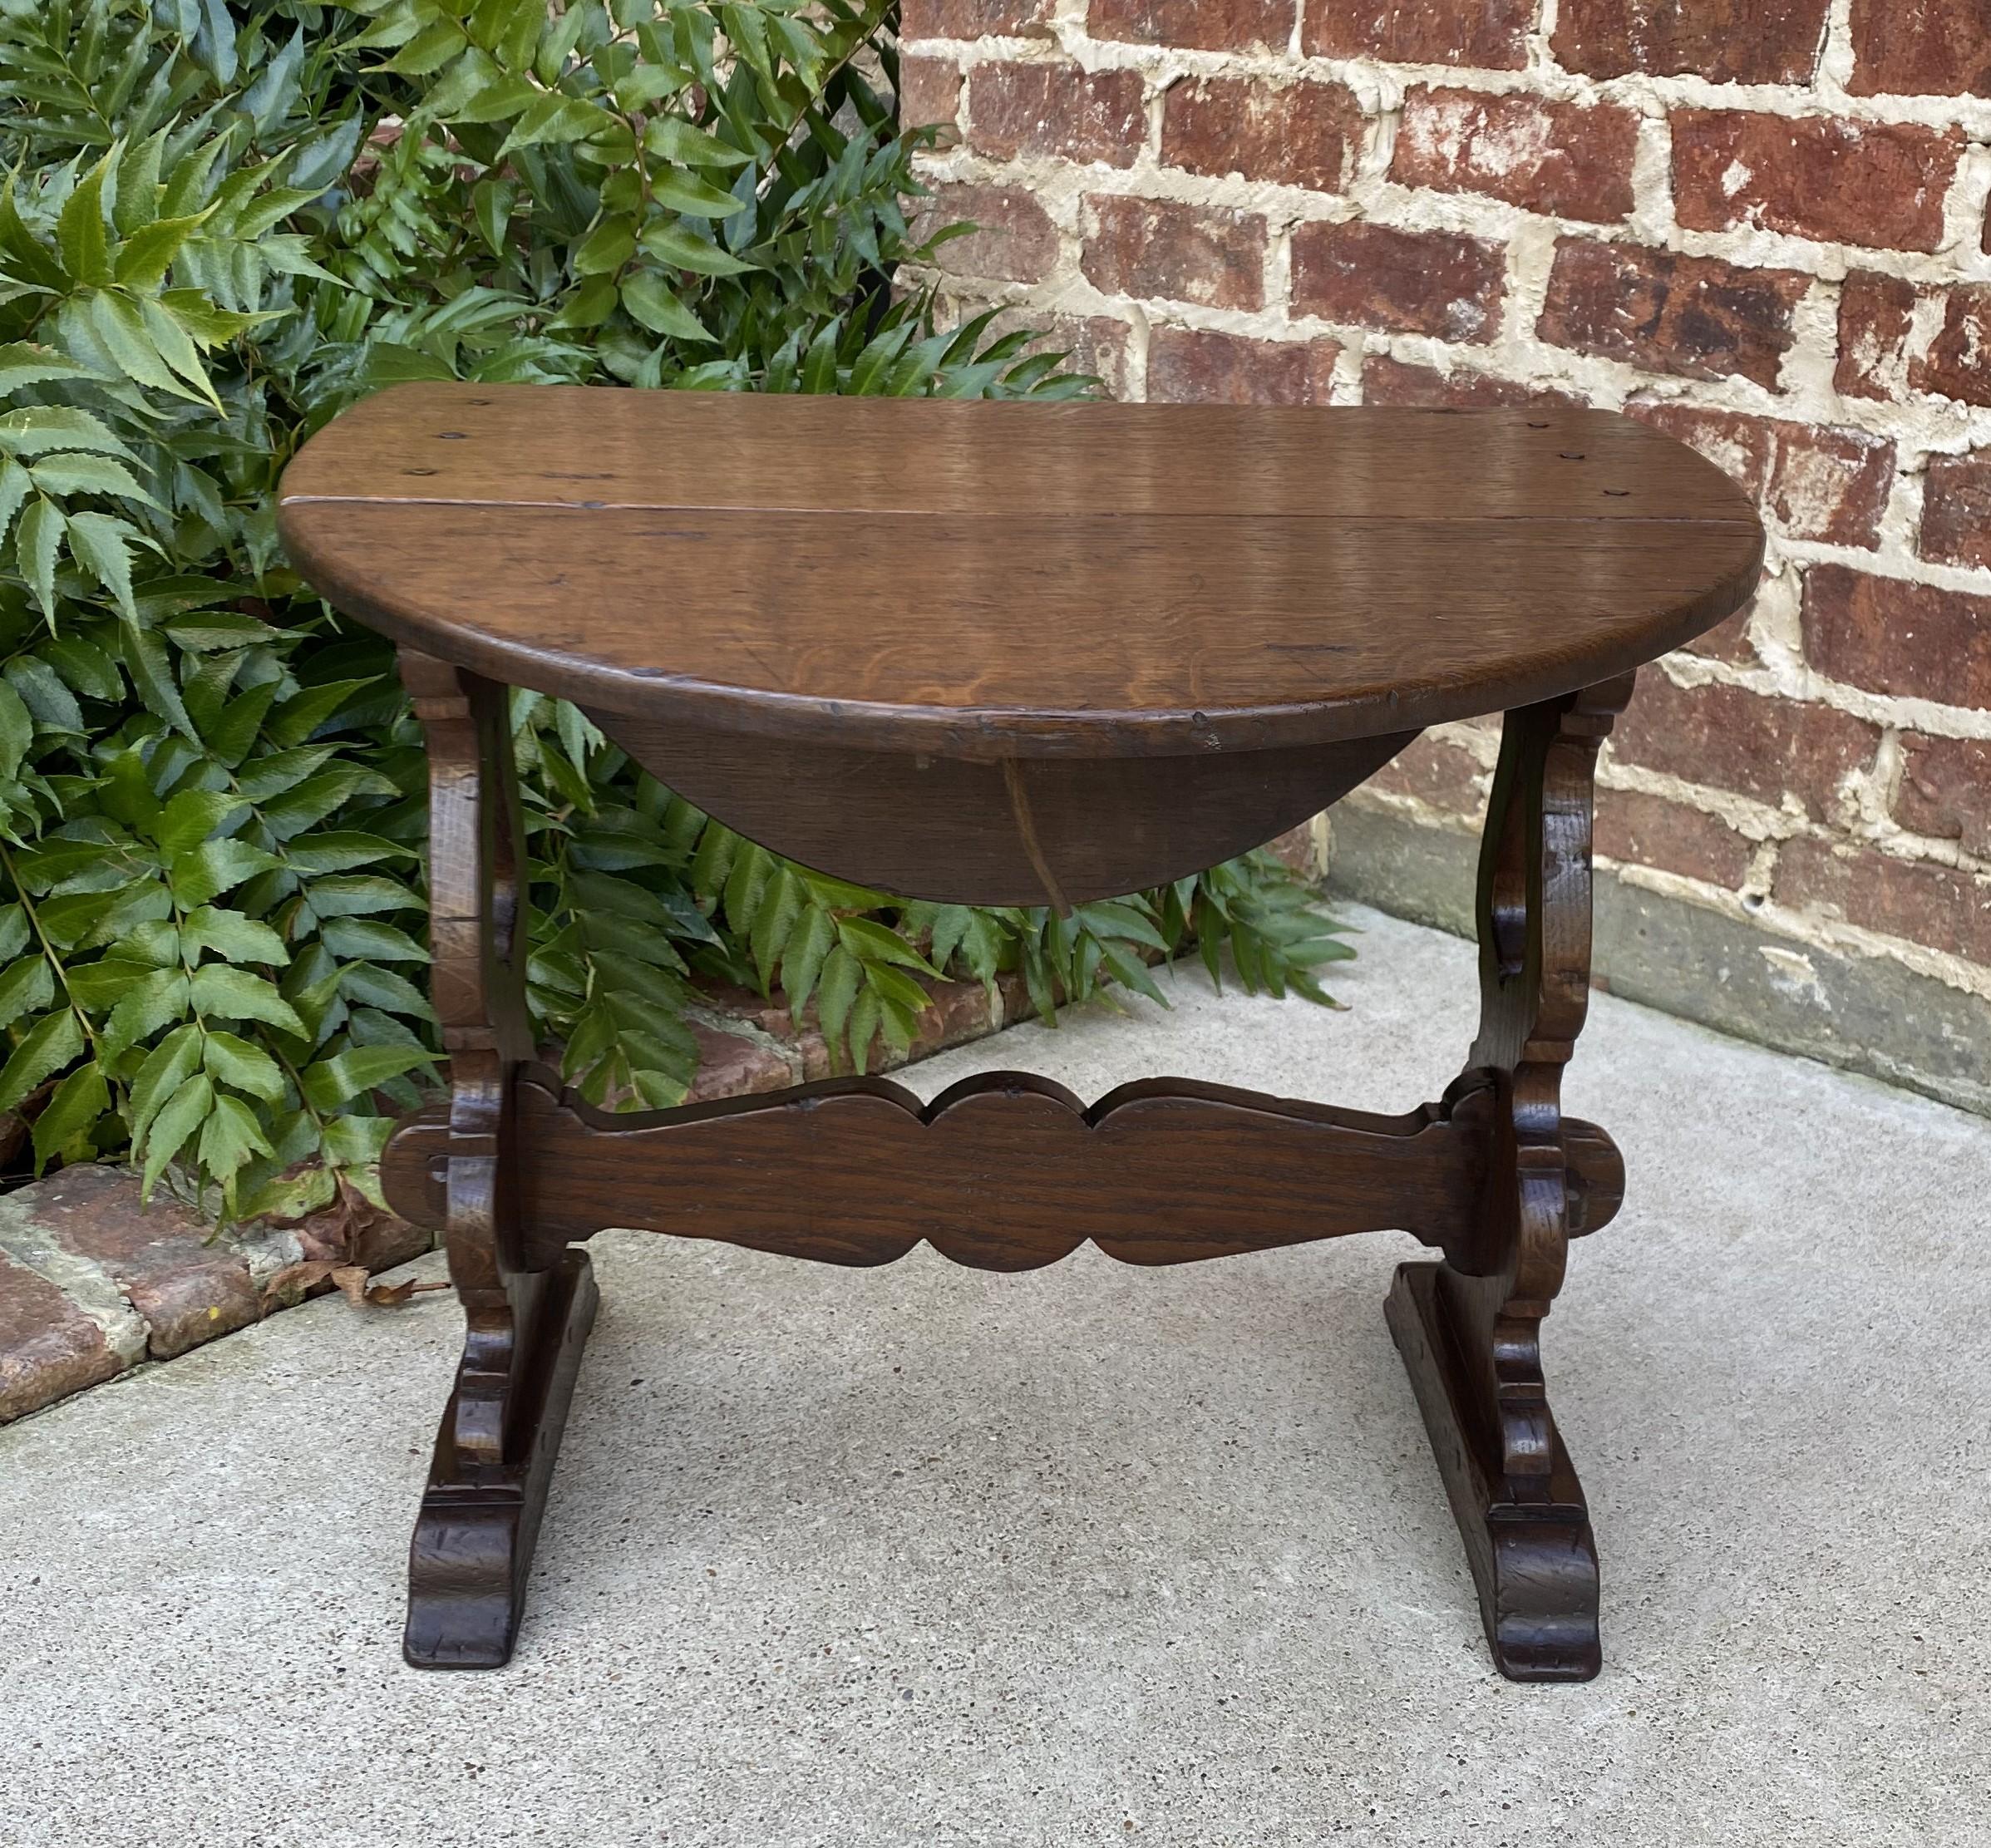 Arts and Crafts Antique English Table Drop Leaf Trestle Base Petite Oak Pegged Oval End Table